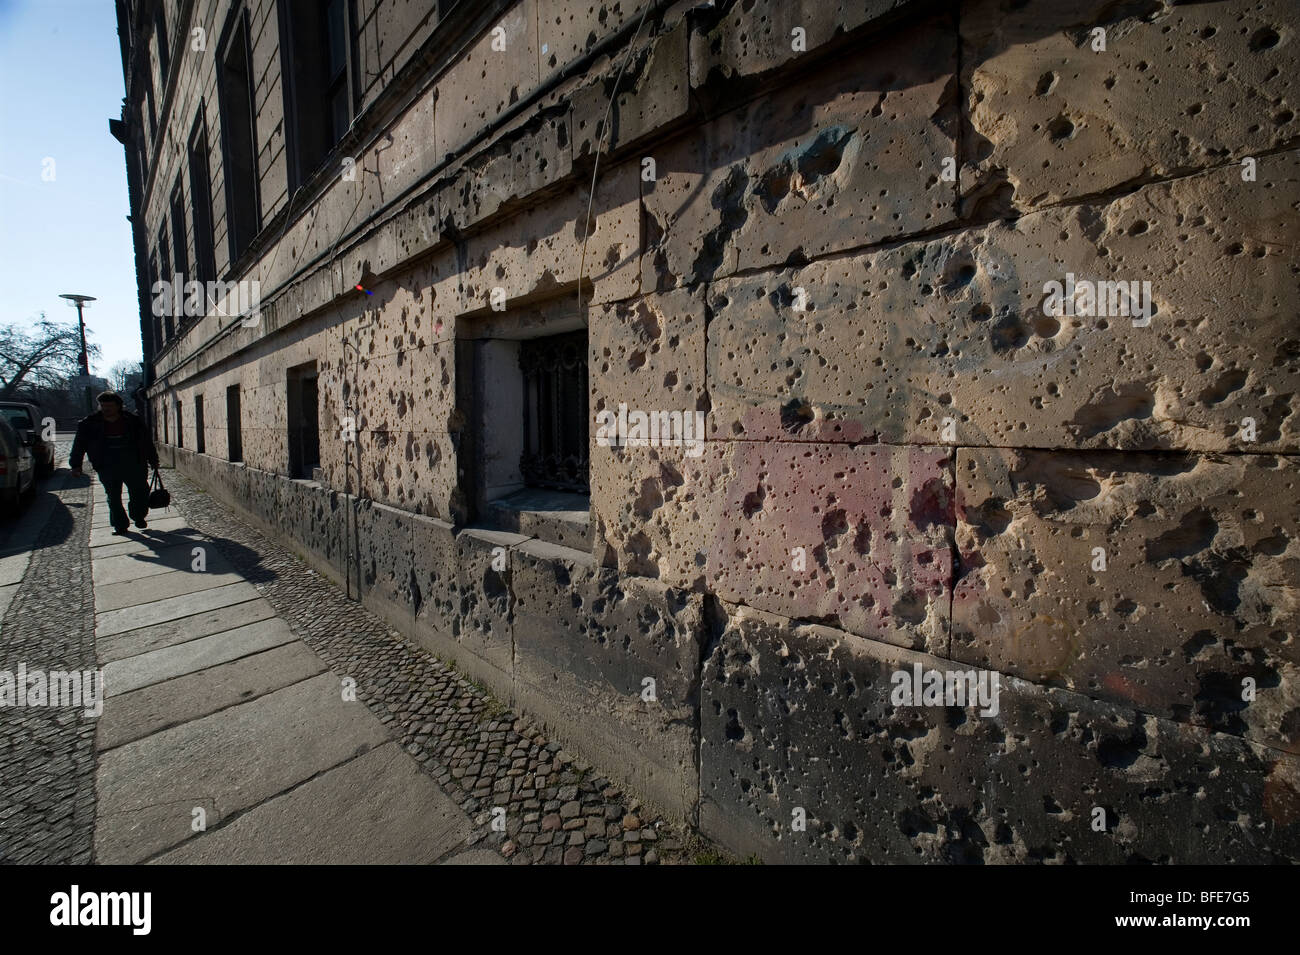 Berlin 2009,bullet holes,museum island,1989 DDR Germany Unified positive forward history War Cold War end East West Divide city Stock Photo